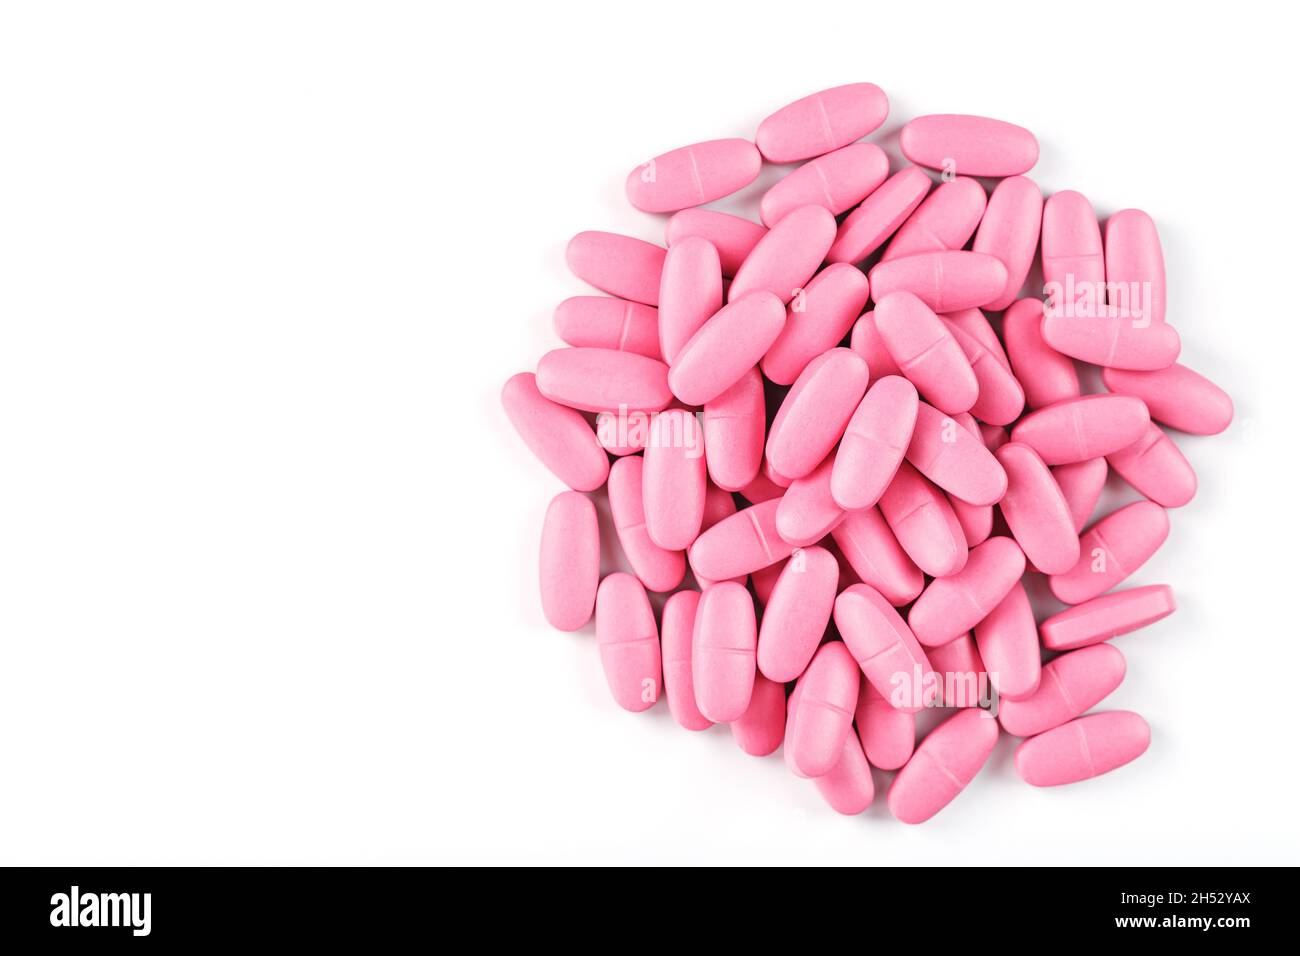 Pink vitamin pills for women on a white background. Multivitamins for women's health, isolate, free space Stock Photo